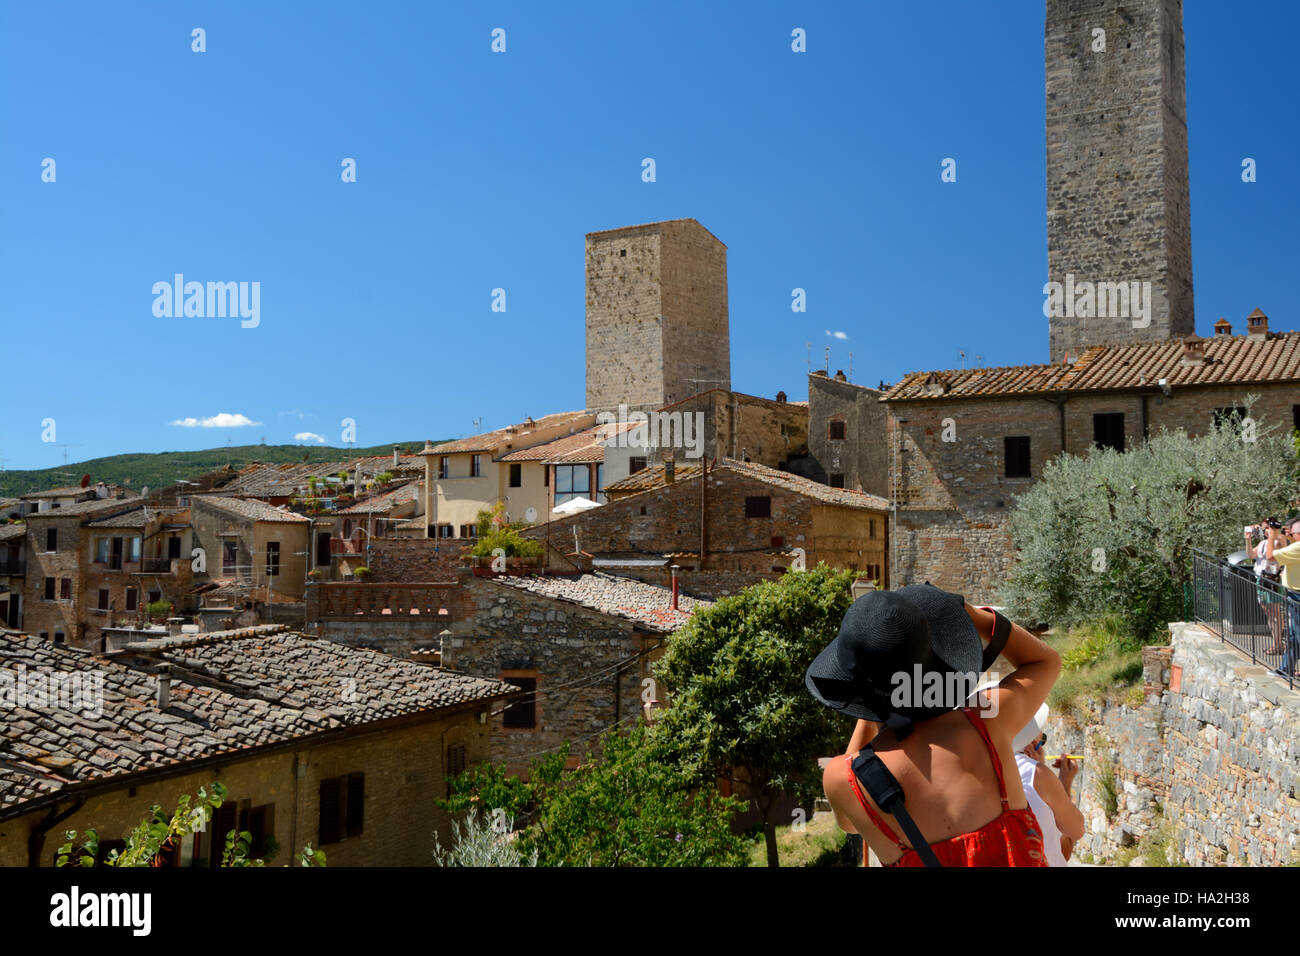 San Gimignano, Italy - September 6, 2016: Unidentified woman in black hat taking picture of San Gimignano city in Tuscany, Italy. Unidentified people Stock Photo